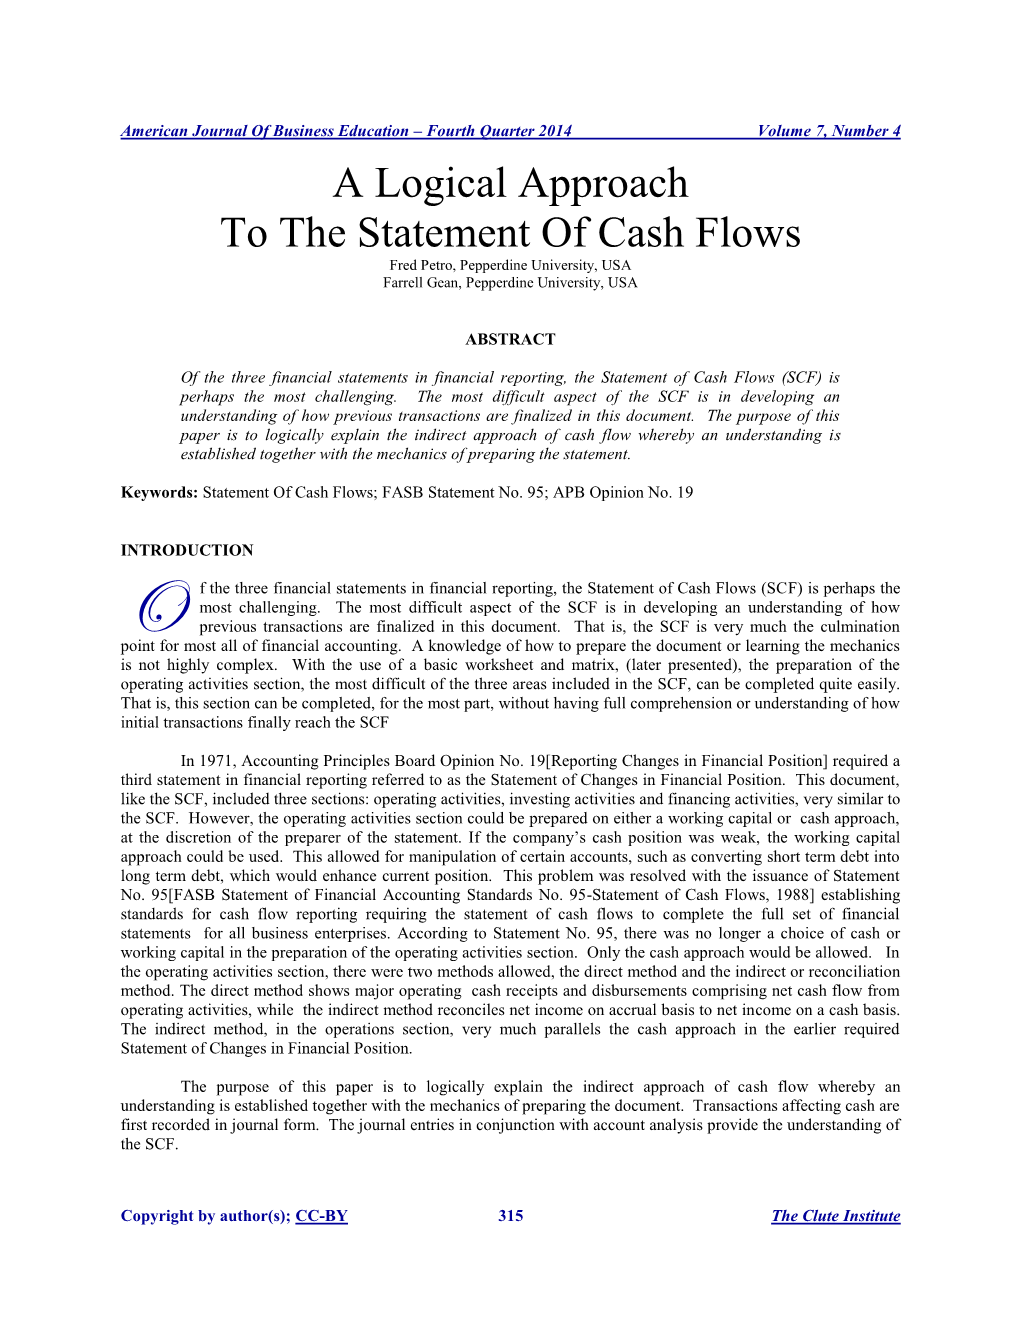 A Logical Approach to the Statement of Cash Flows Fred Petro, Pepperdine University, USA Farrell Gean, Pepperdine University, USA